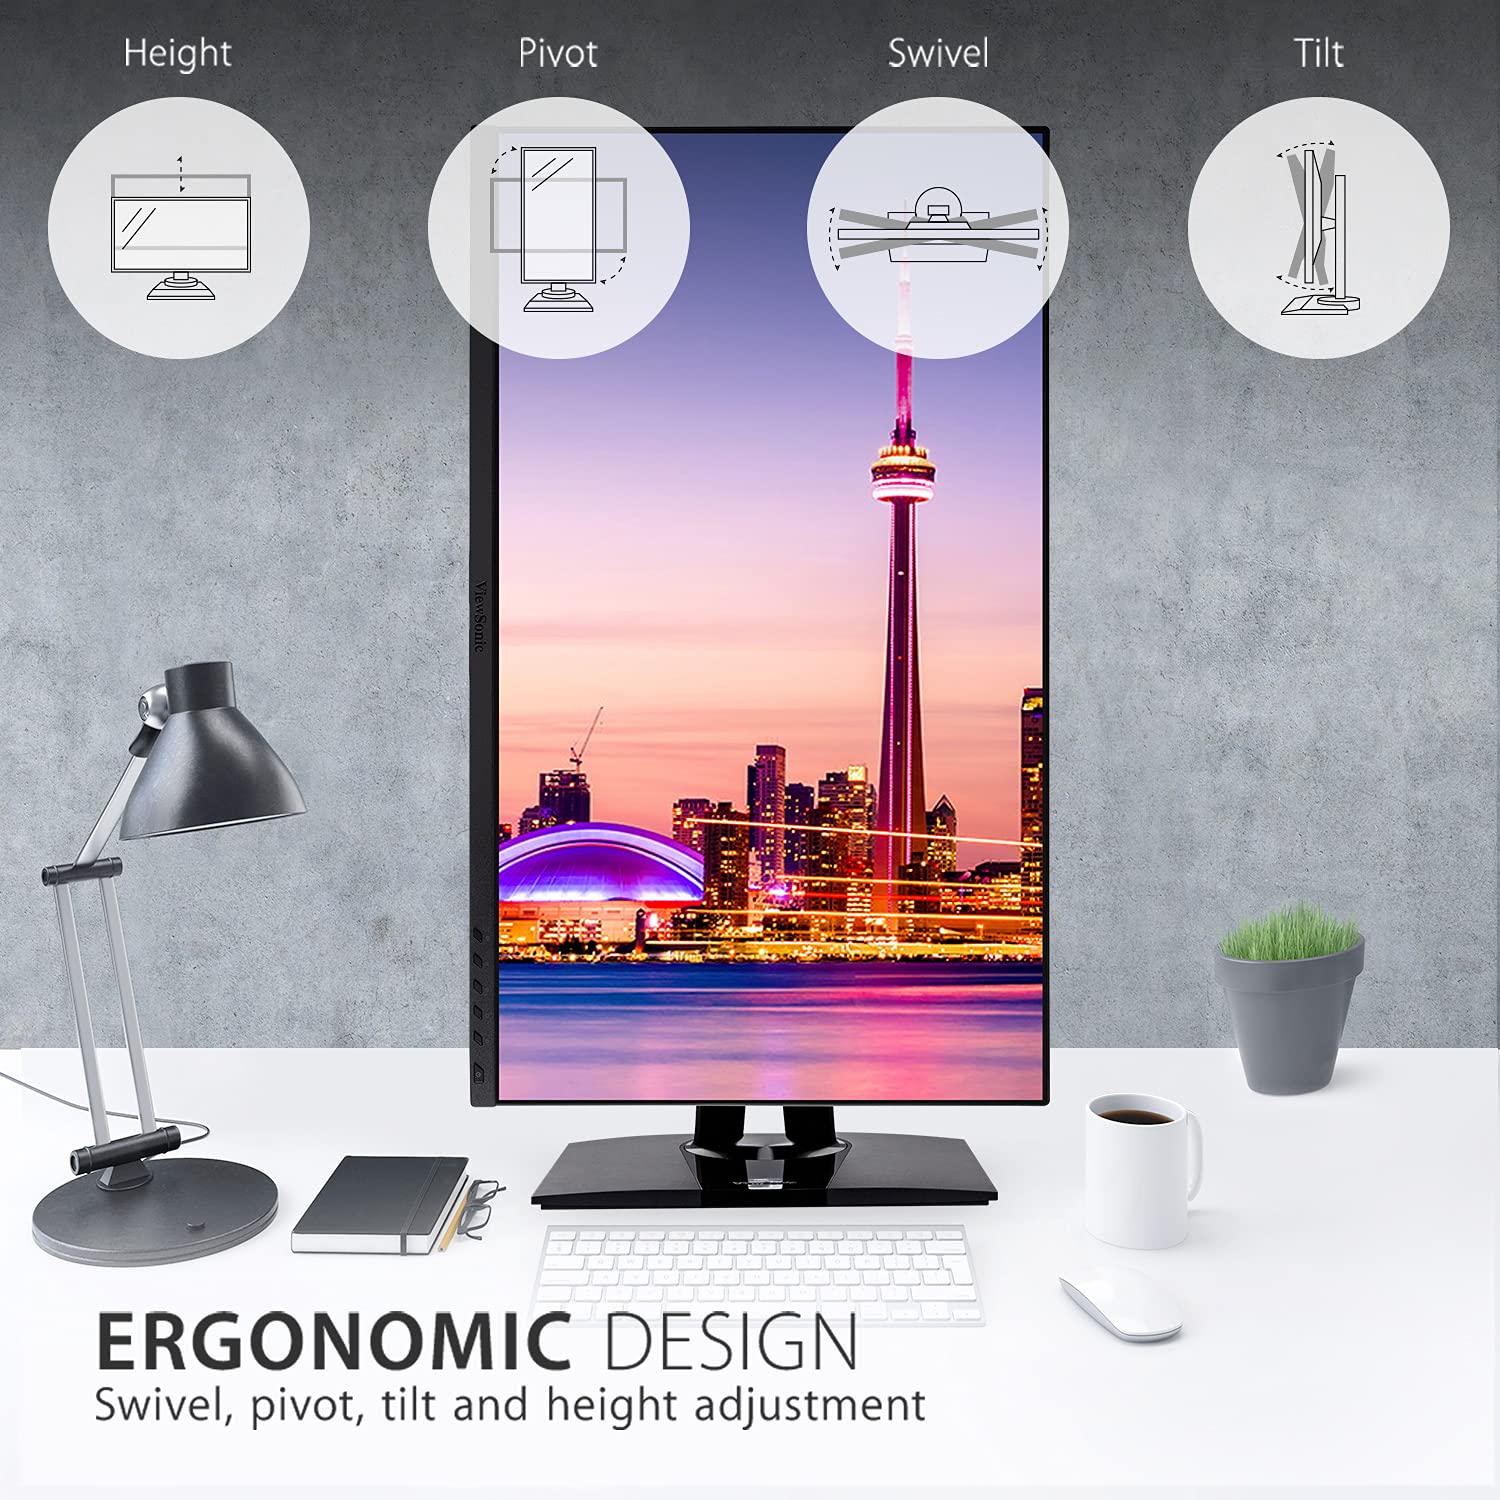 ViewSonic VP2756-4K 27 Inch Premium IPS 4K Ergonomic Monitor with Ultra-Thin Bezels, Color Accuracy, Pantone Validated, HDMI, DisplayPort and USB Type C for Professional Home and Office,Black